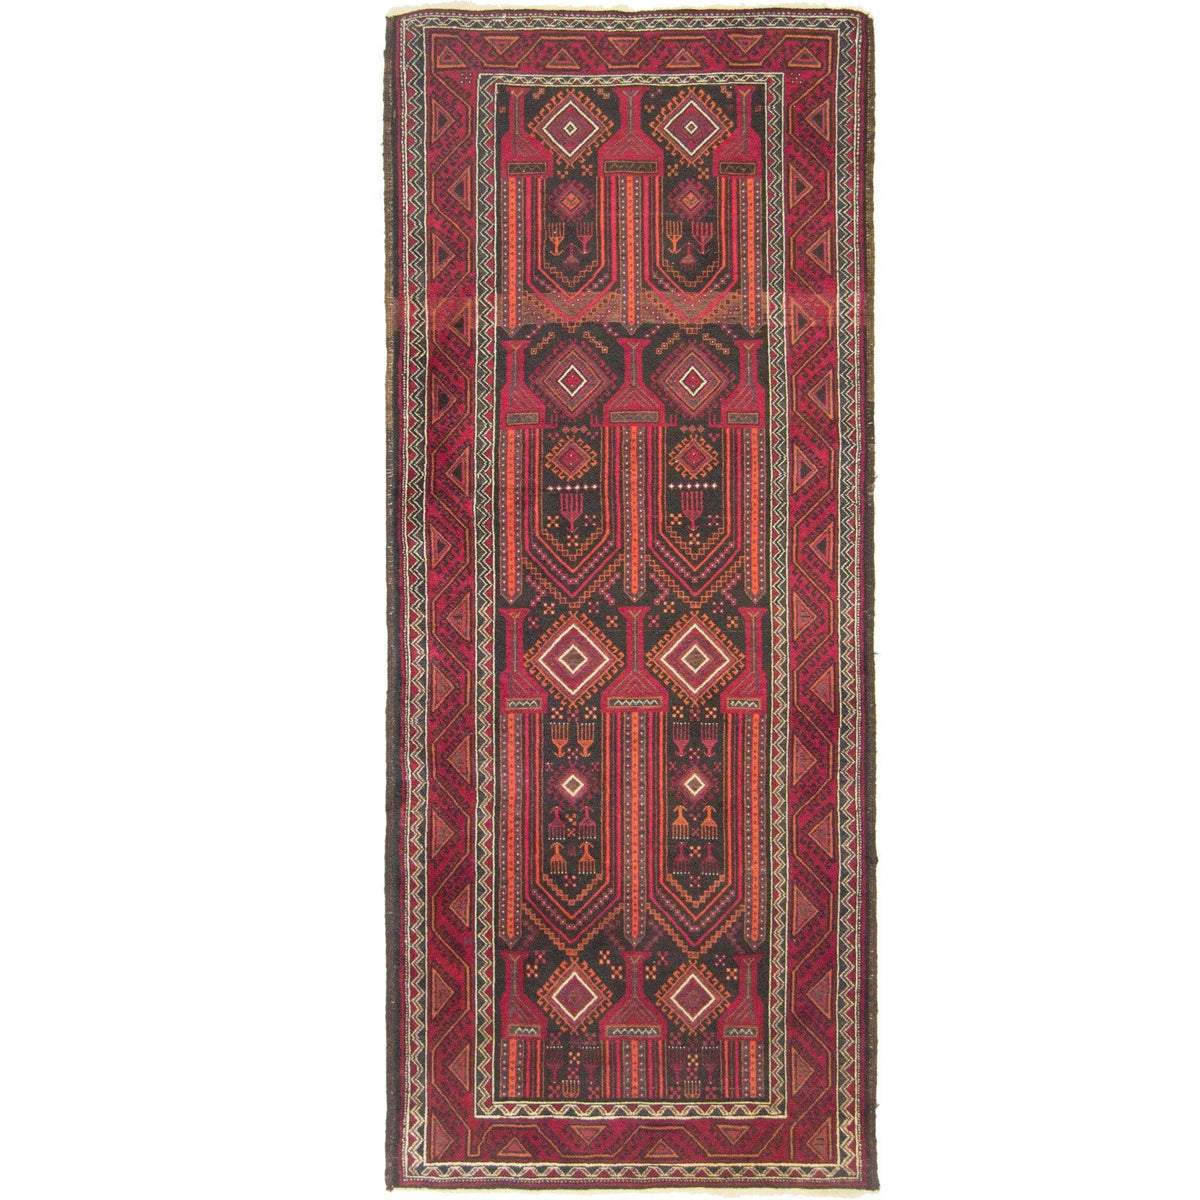 Fine Hand-knotted Persian Wool Baluchi Rug 121cm x 276cm